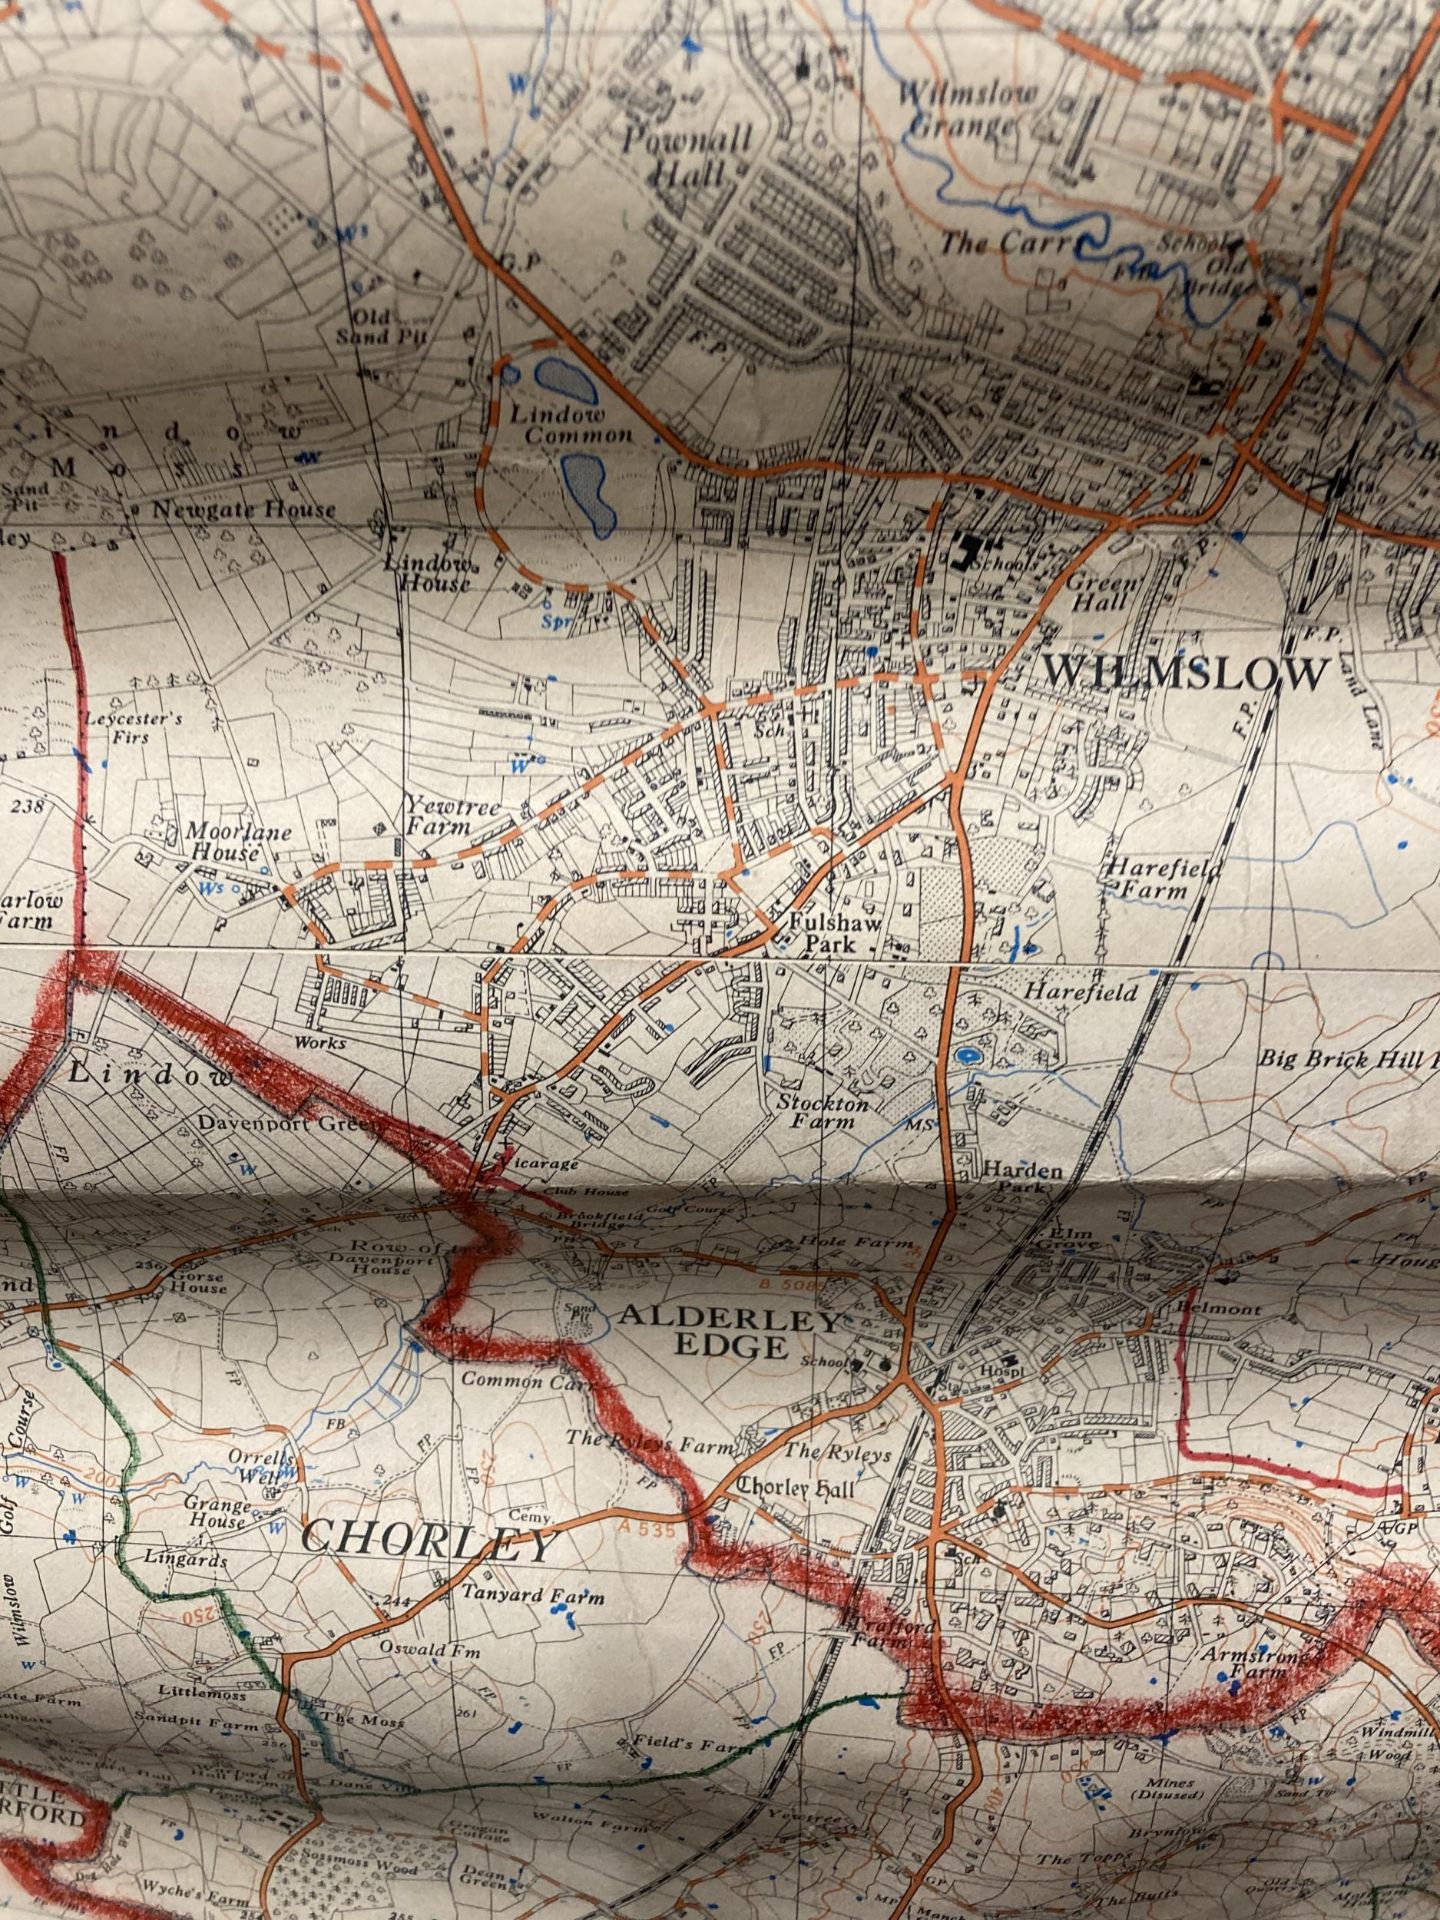 AN OLD ORDNANCE SURVEY MAP COVERING LANCASHIRE, CHESHIRE AND STAFFORDSHIRE APPROX 116 X 100 CM - Image 4 of 5